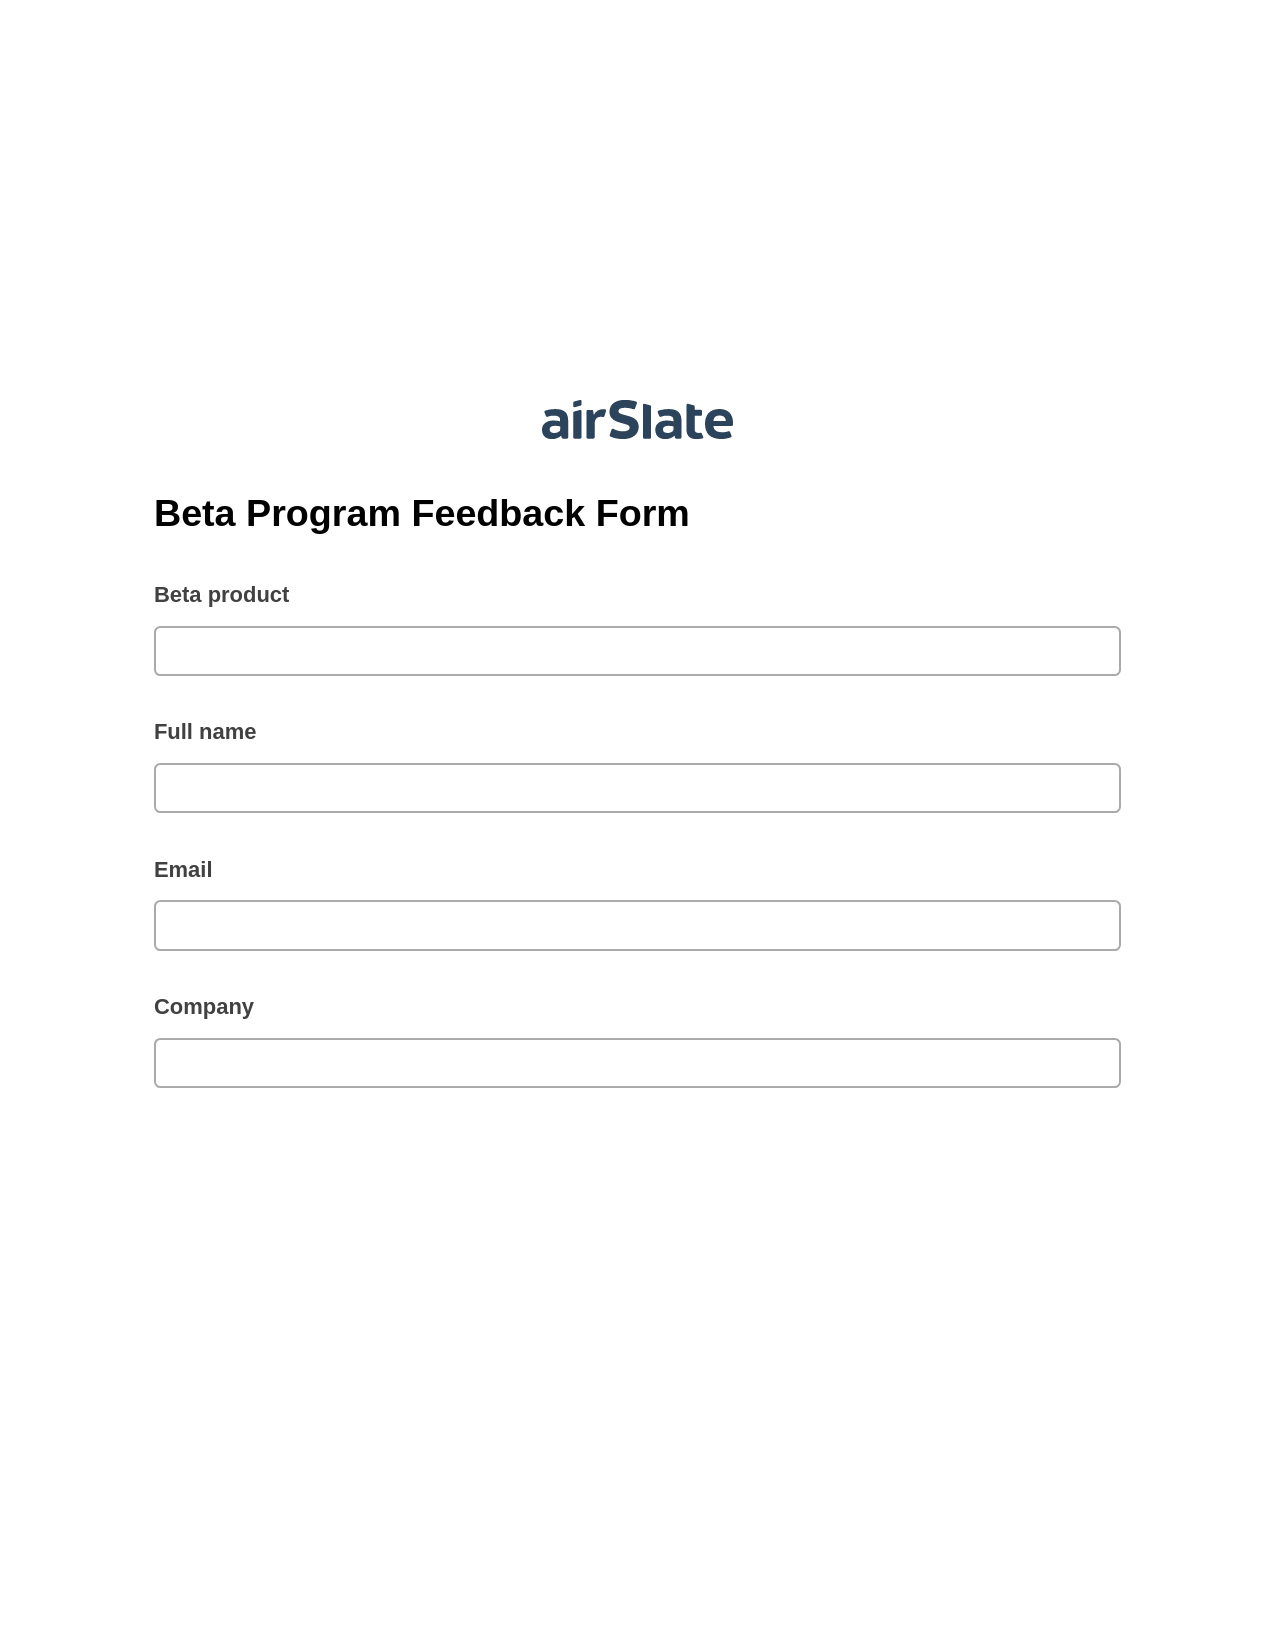 Beta Program Feedback Form Pre-fill from CSV File Bot, Send a Slate to Salesforce Contact Bot, Export to Smartsheet